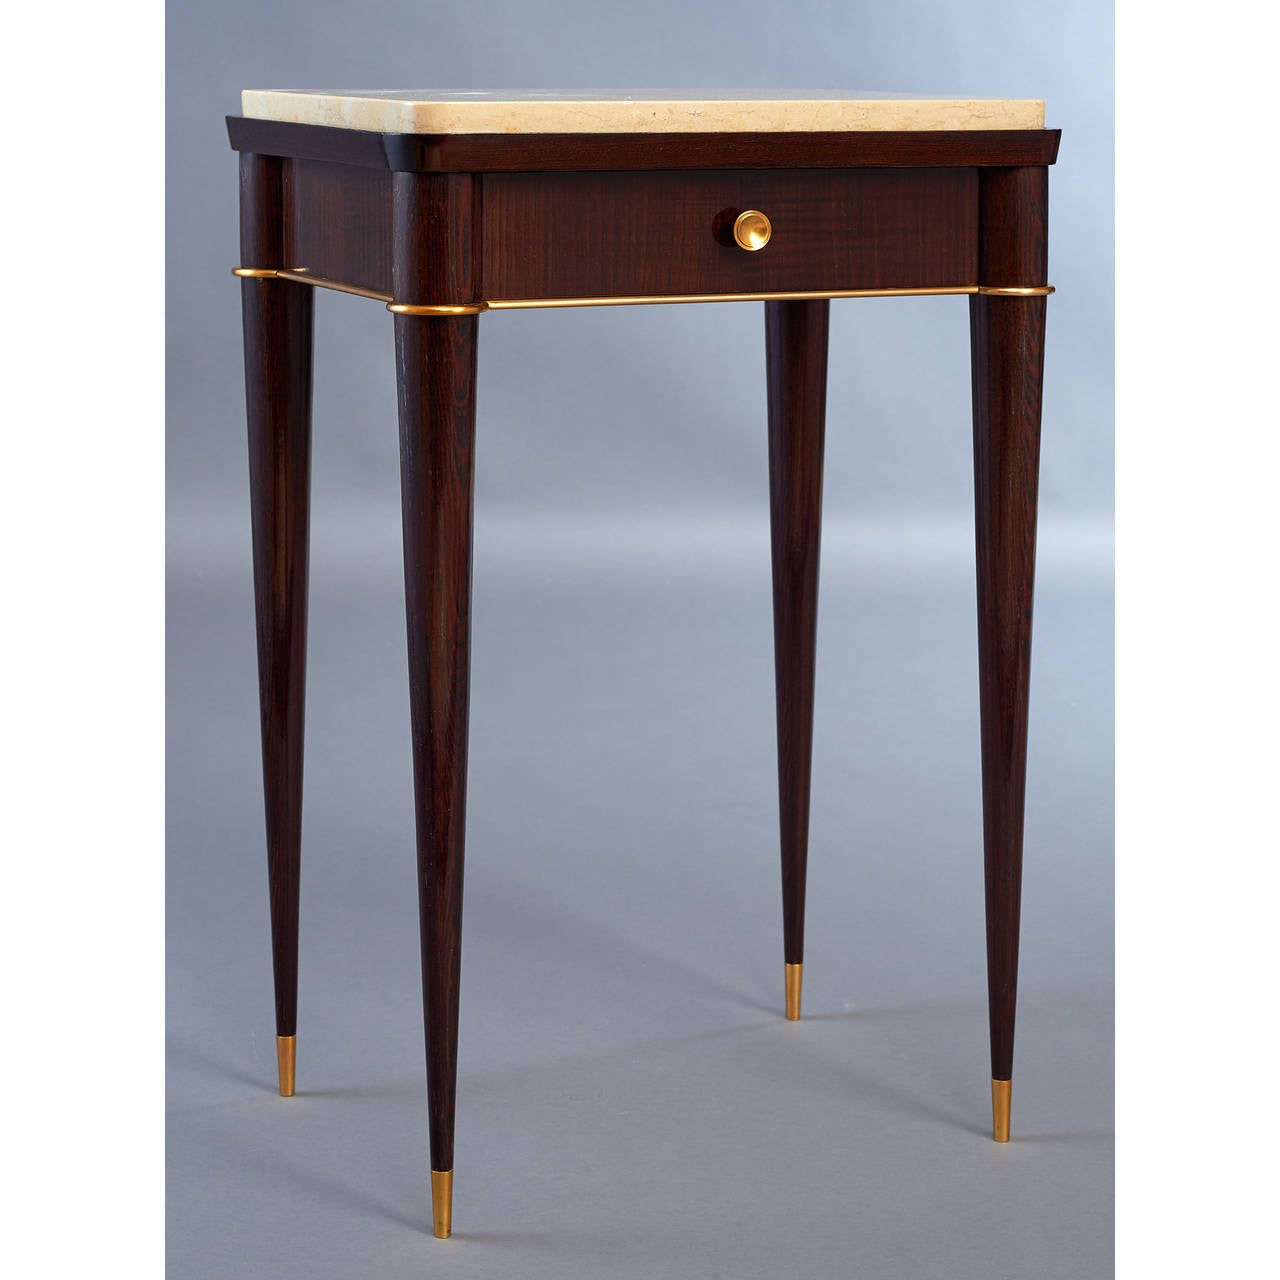 Batistin Spade (1891-1969).
An exquisite pair of side tables with drawer, in mahogany stained oak with polished marble tops and bronze mounts, the stiletto tapered legs terminating in bronze sabots.
Finished on all sides, may be used